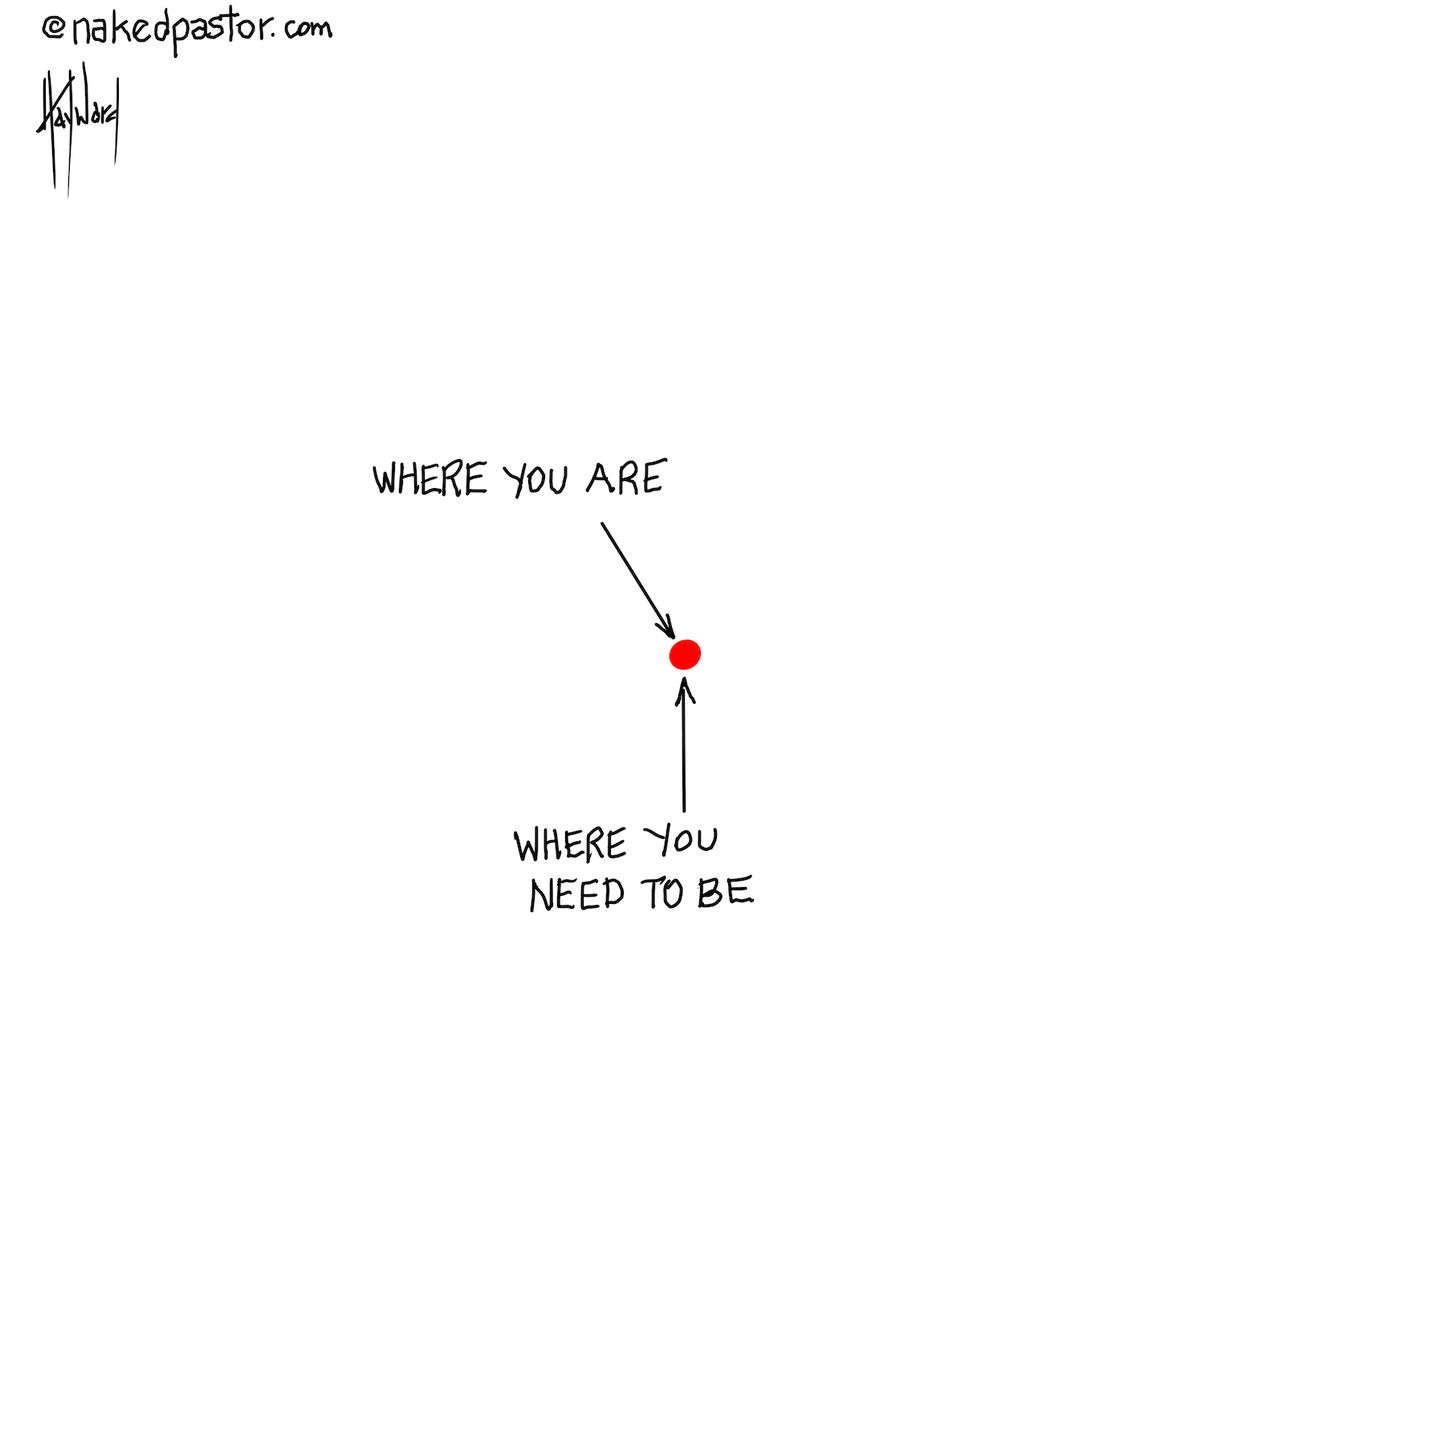 Where You Are and Where You Need to Be Original Cartoon Drawing